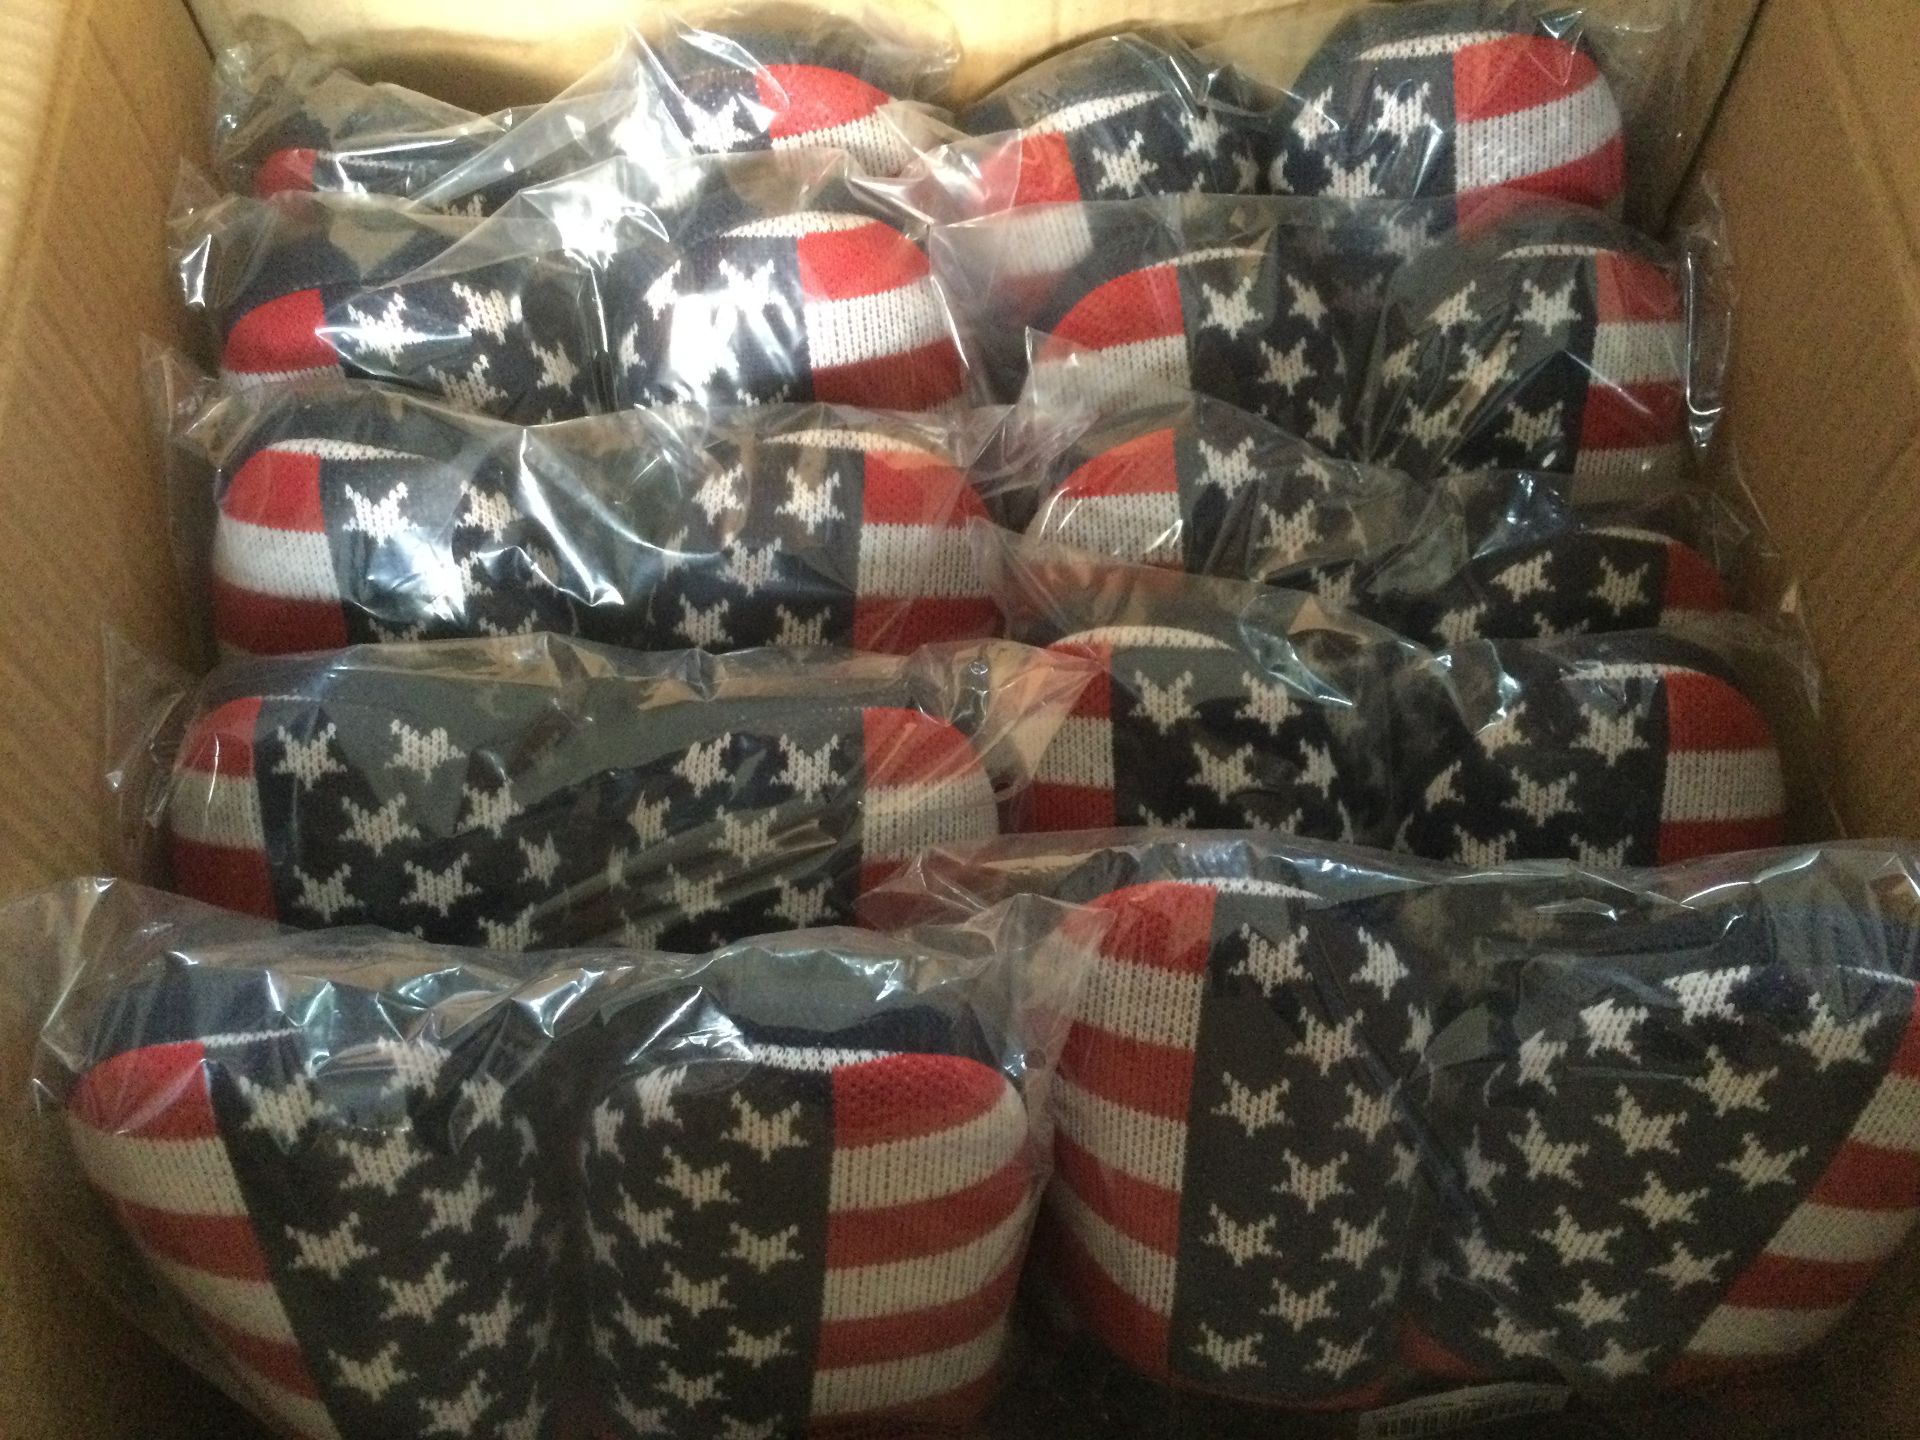 Job Lot 10 x Men's Dunlop, “USA Stars and Stripes” Memory Foam, Mule Slippers, Size M (8/9) - Image 6 of 7